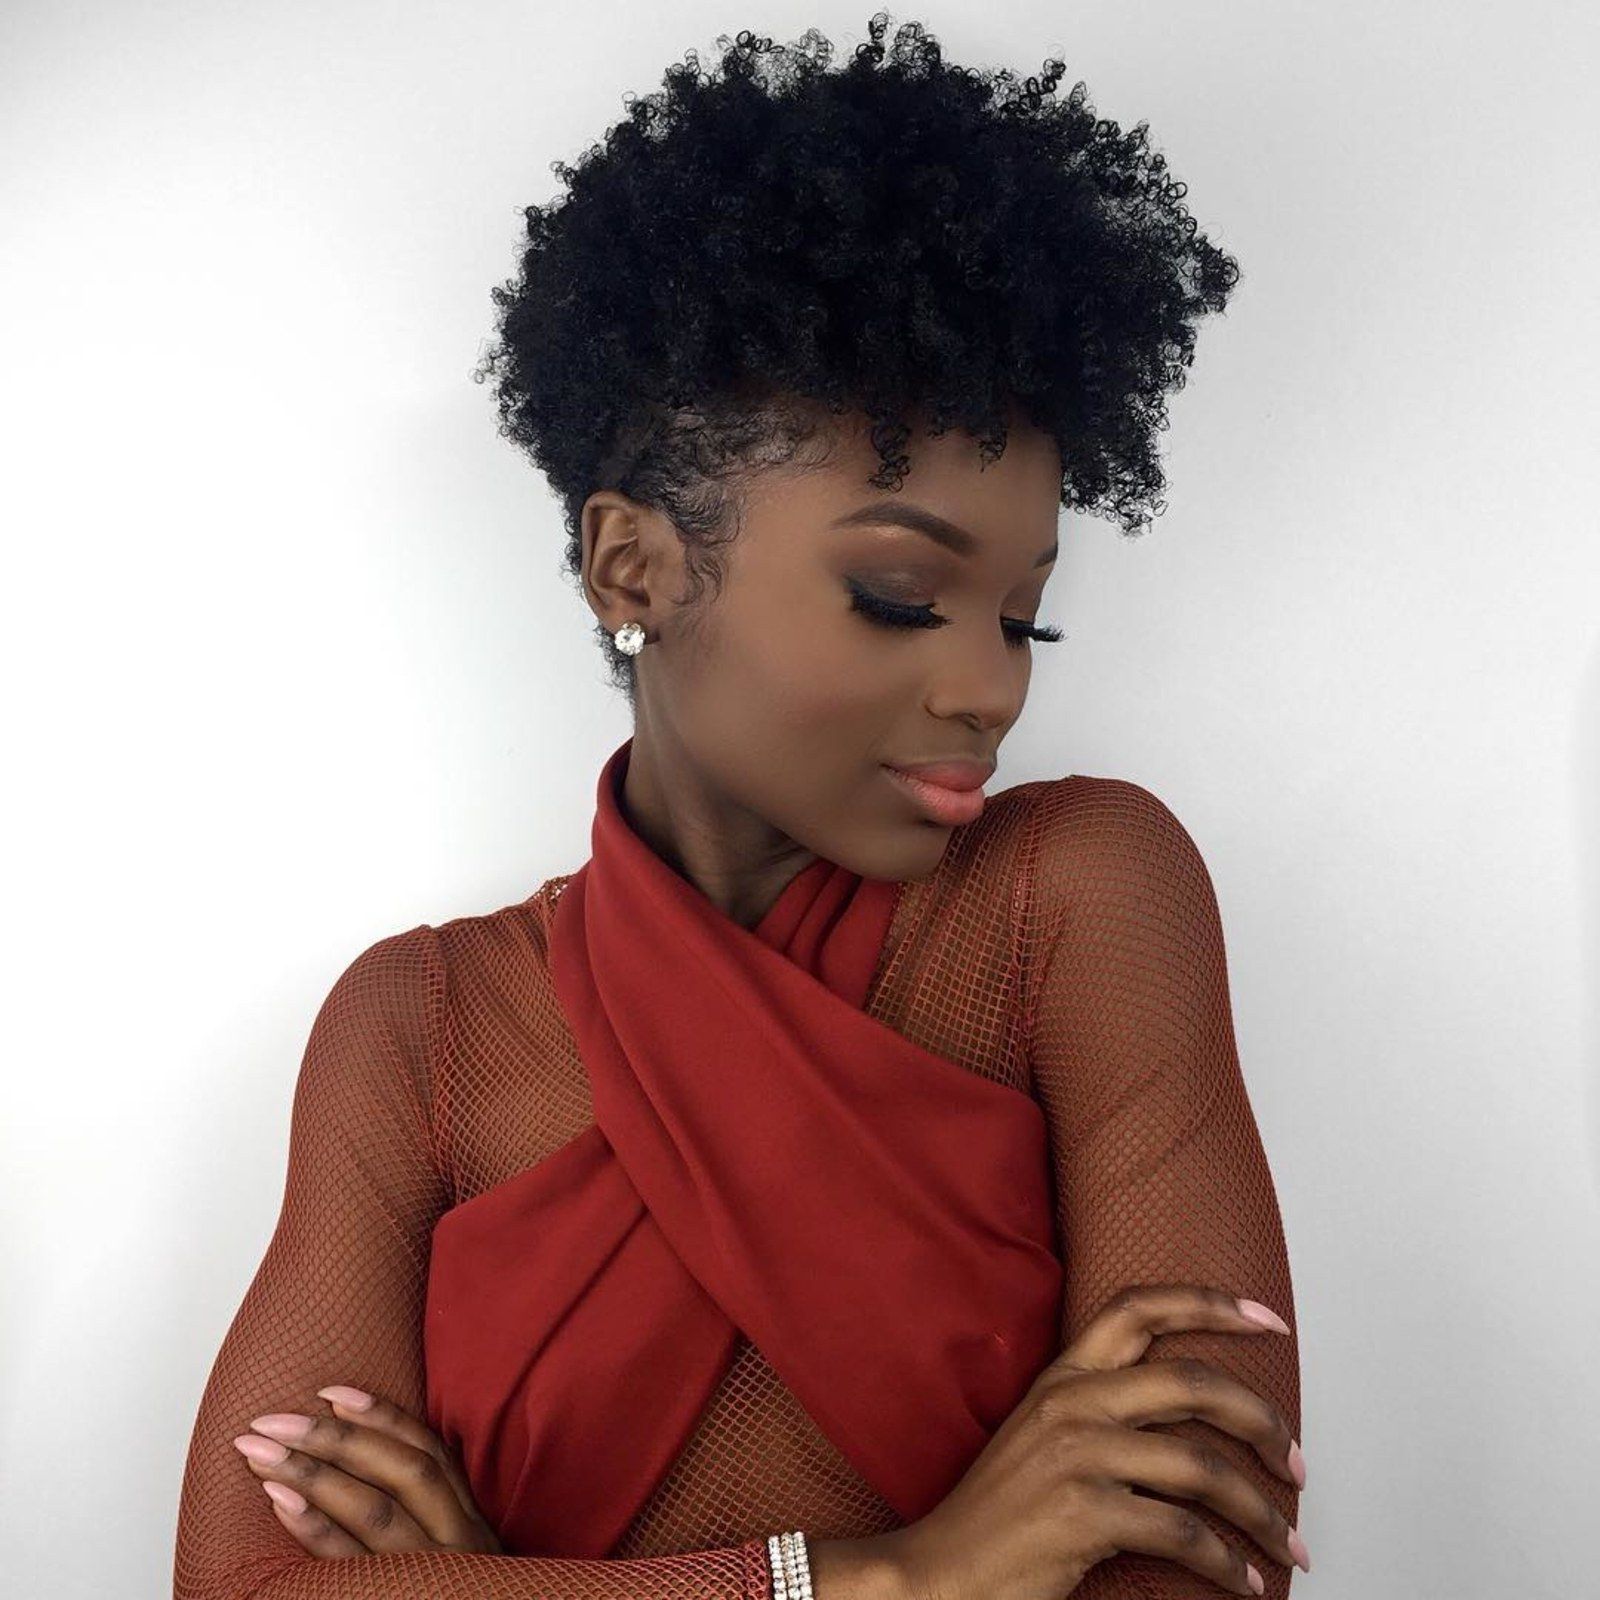 28 Curly Pixie Cuts That Are Perfect For Fall 2017 – Glamour With Regard To Curly Black Tapered Pixie Hairstyles (View 19 of 20)